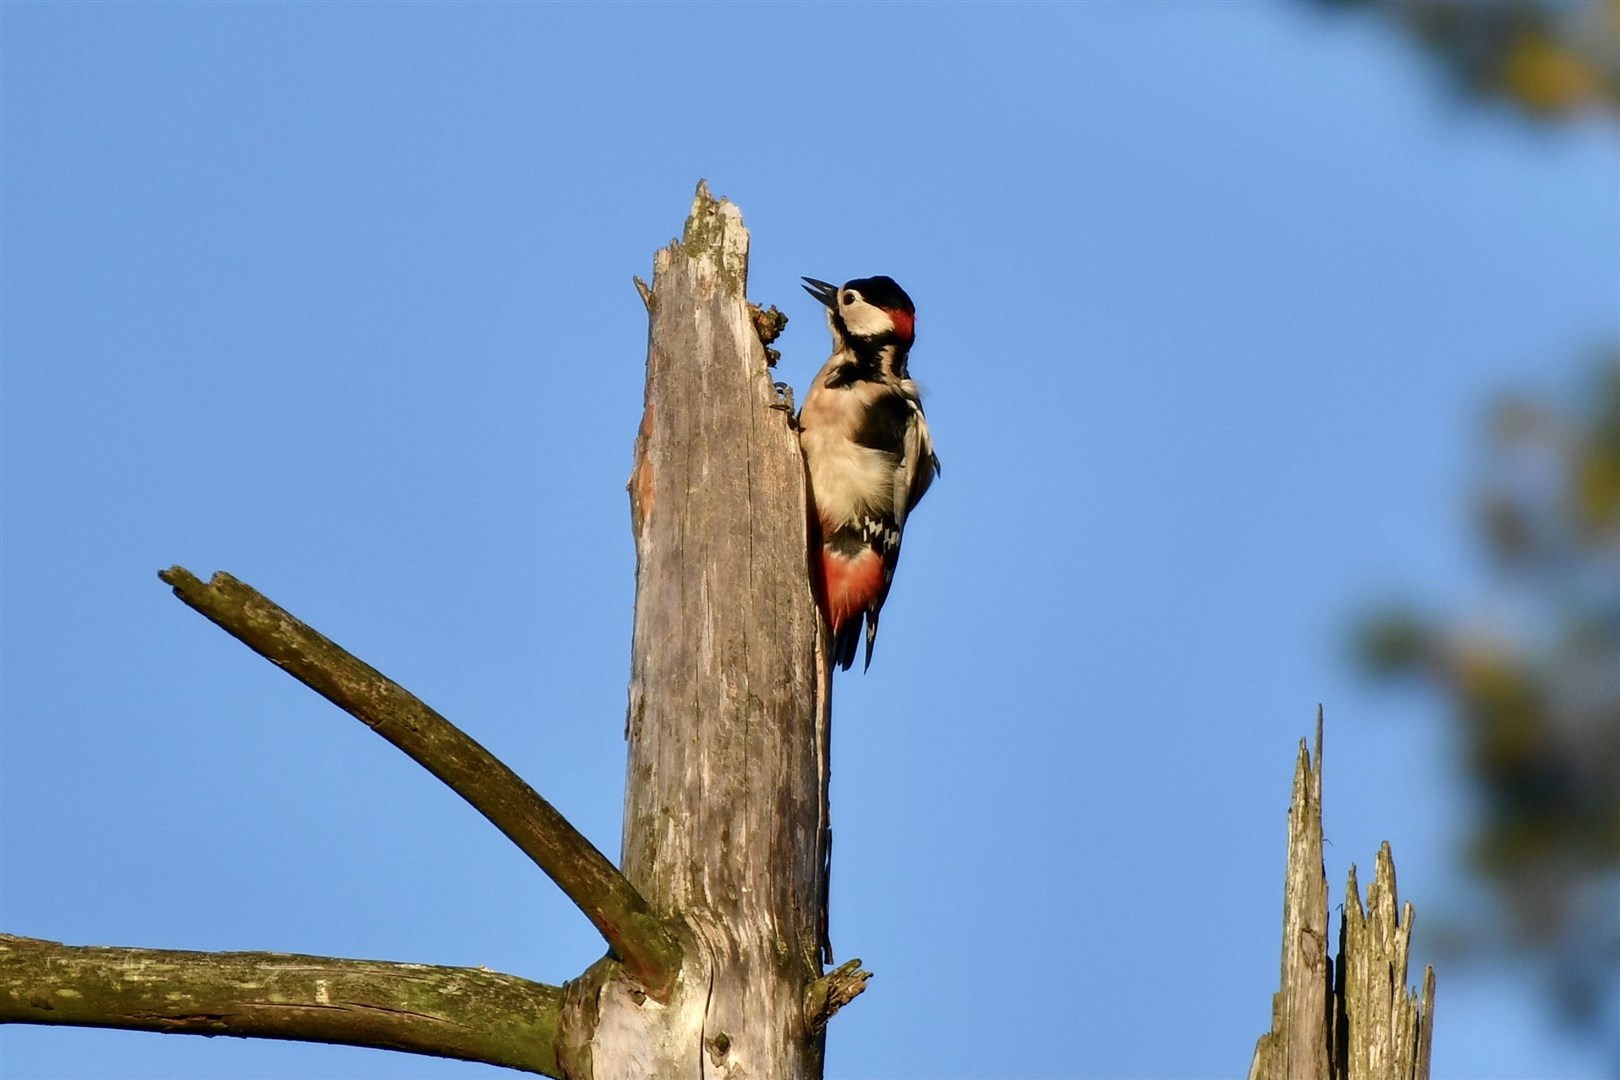 Reader Hazel Thomson noticed this spotted woodpecker while on a walk through Spynie Bird Hide.